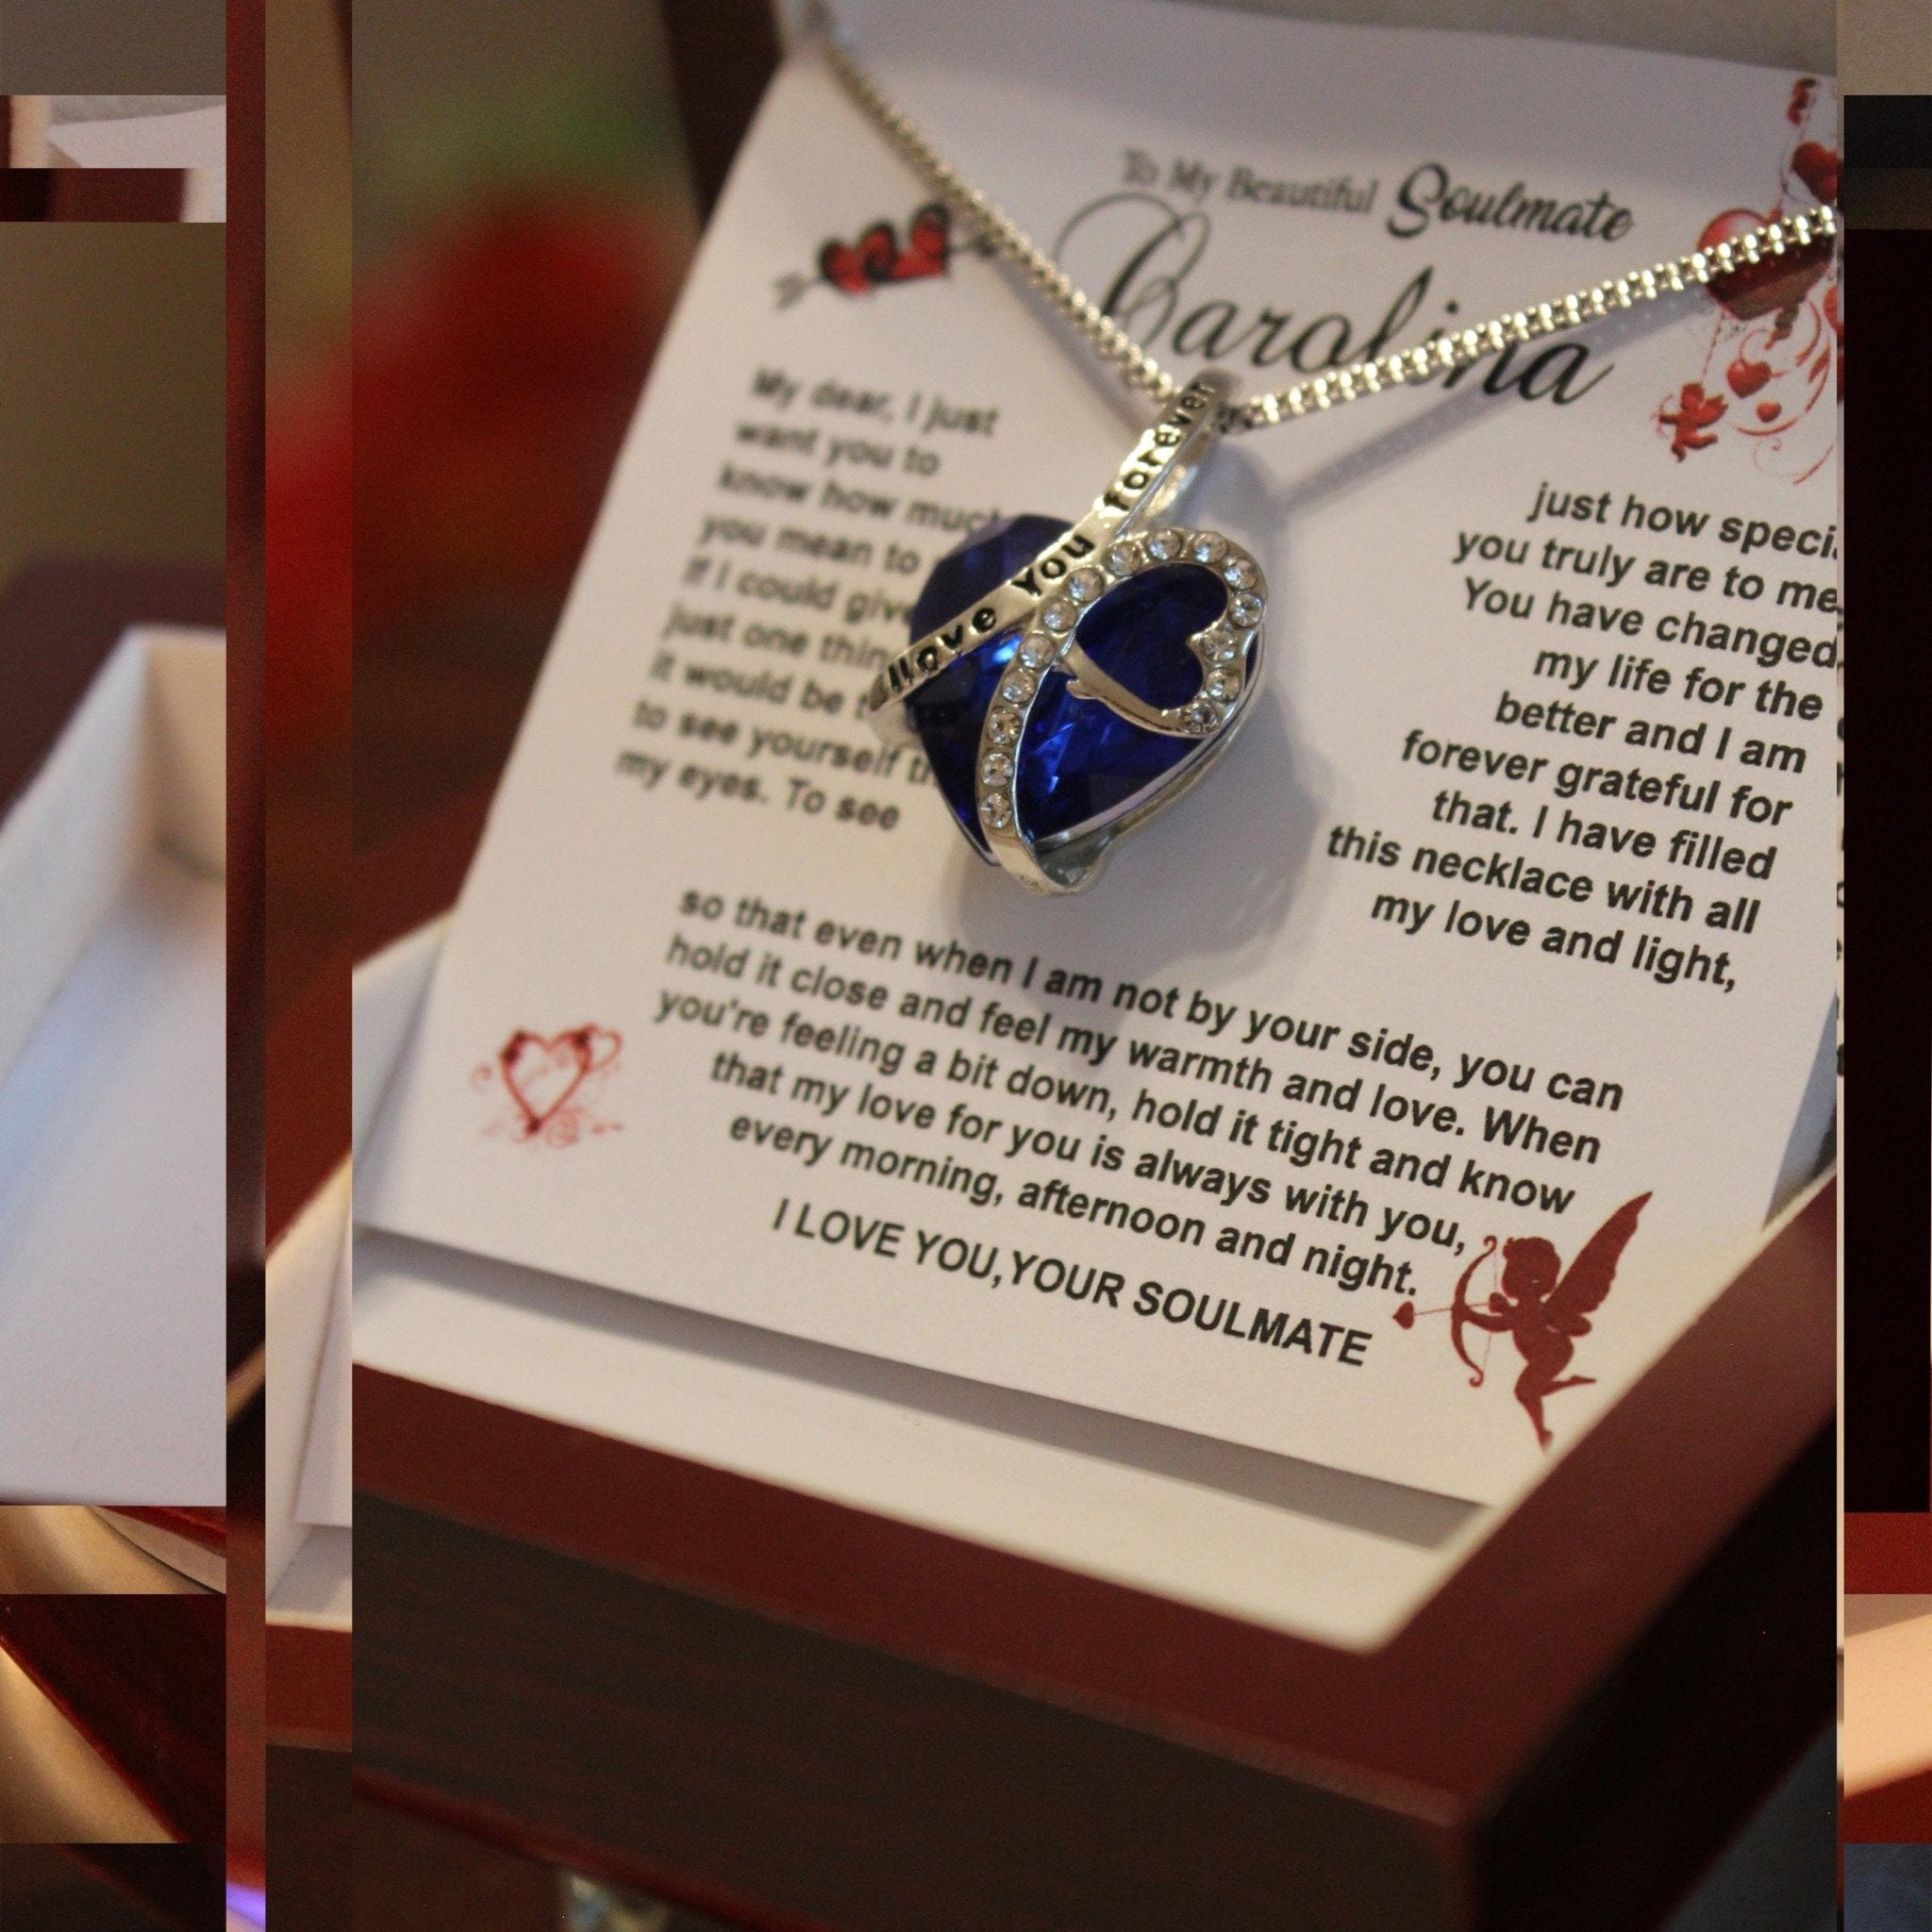 Quincy-Personalize - To My Beautiful Soulmate - Hugging this necklace to feel my love-Blue heart - Real Gifts Of Love